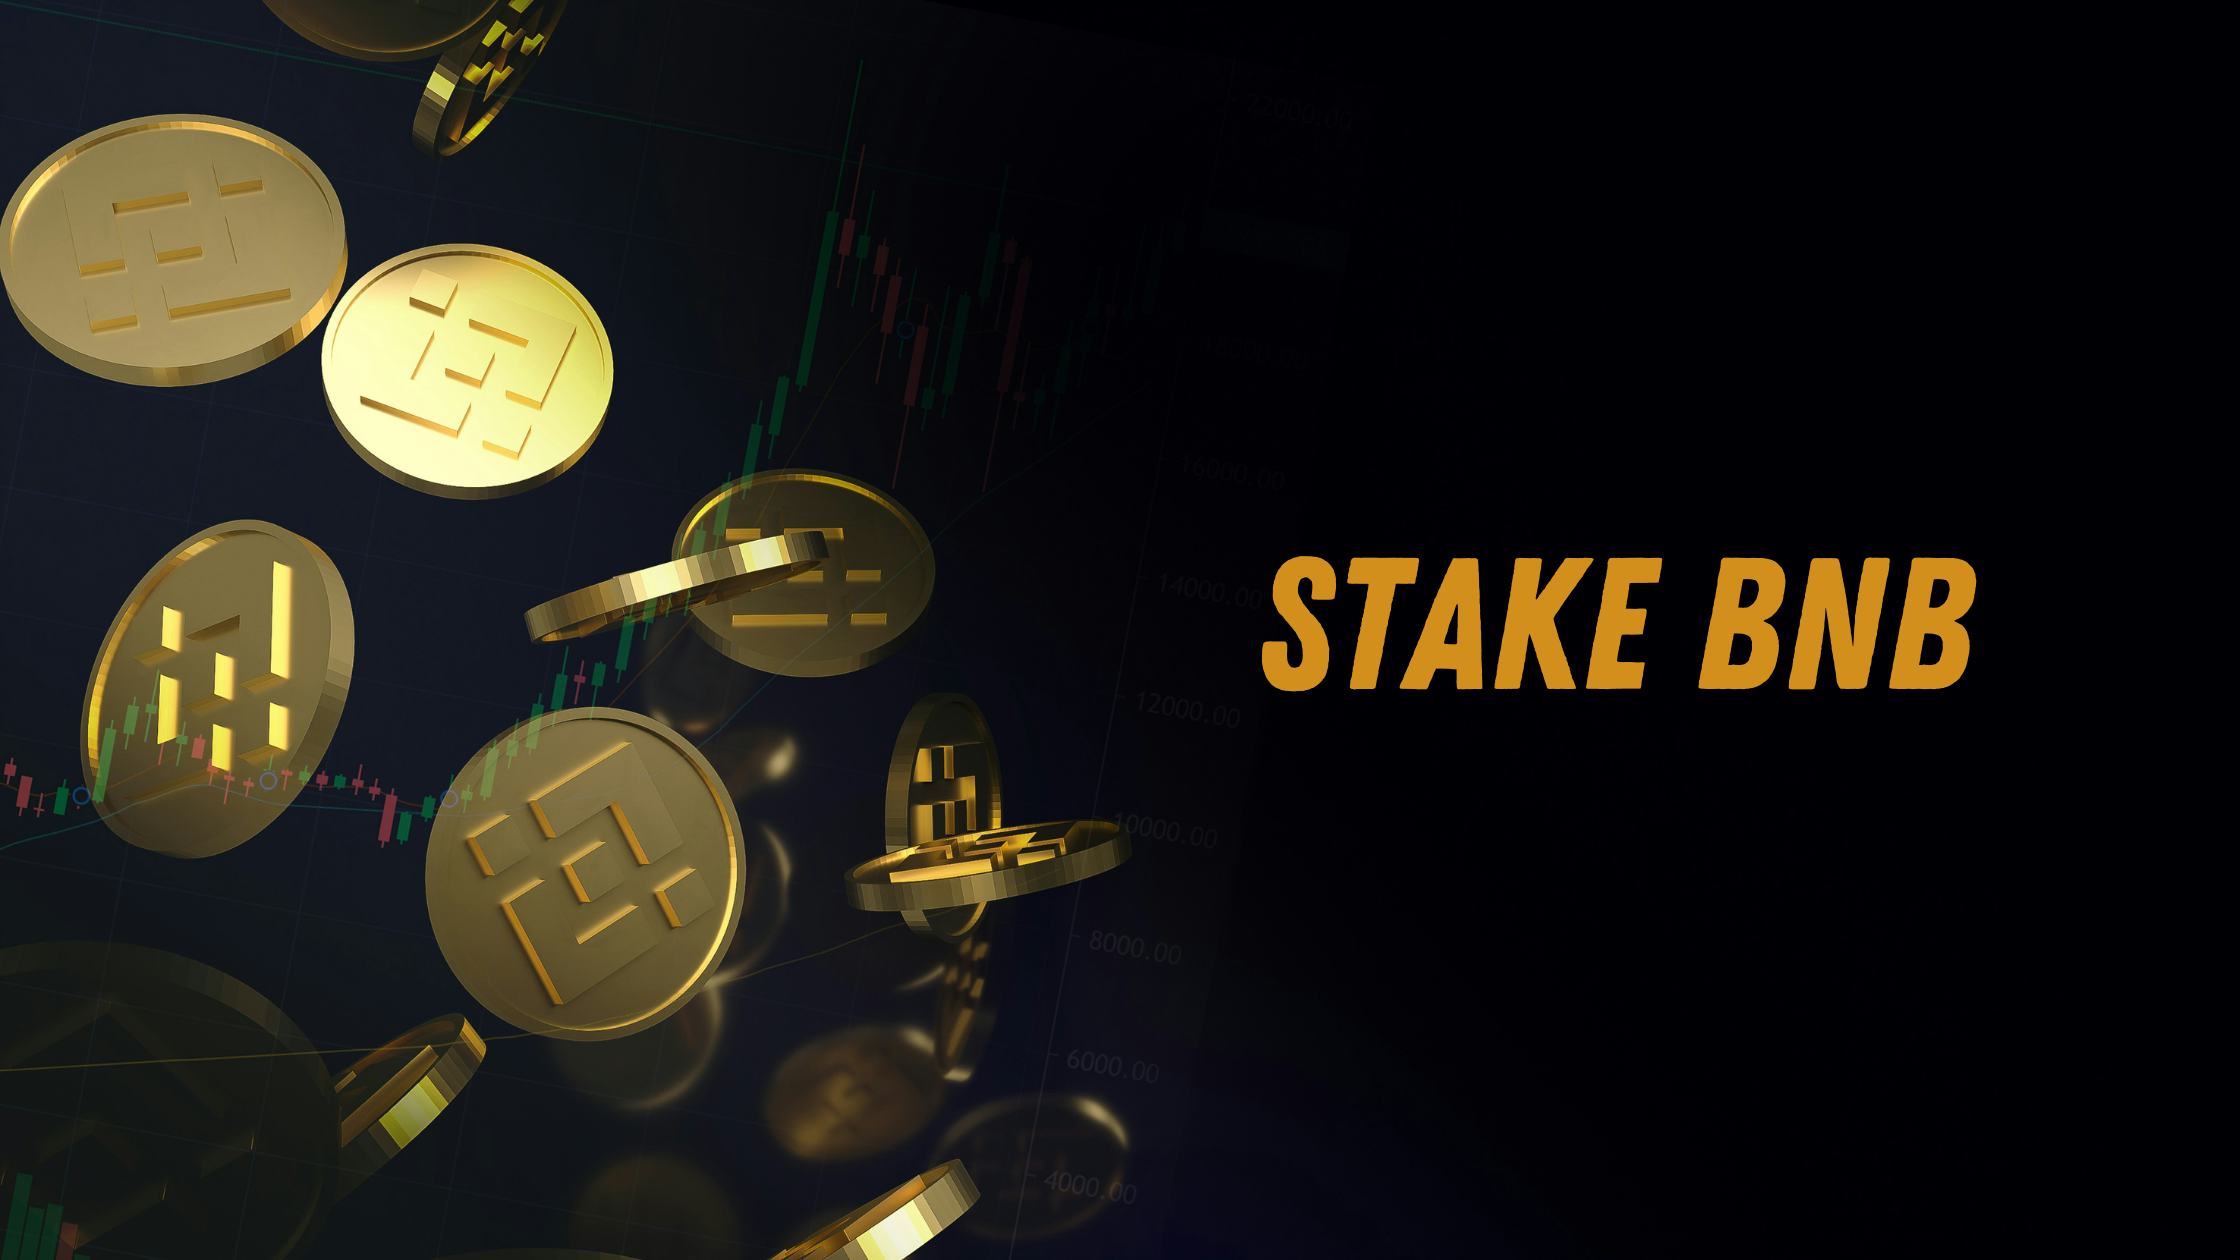 Stake BNB: A comprehensive guide about staking and related processes